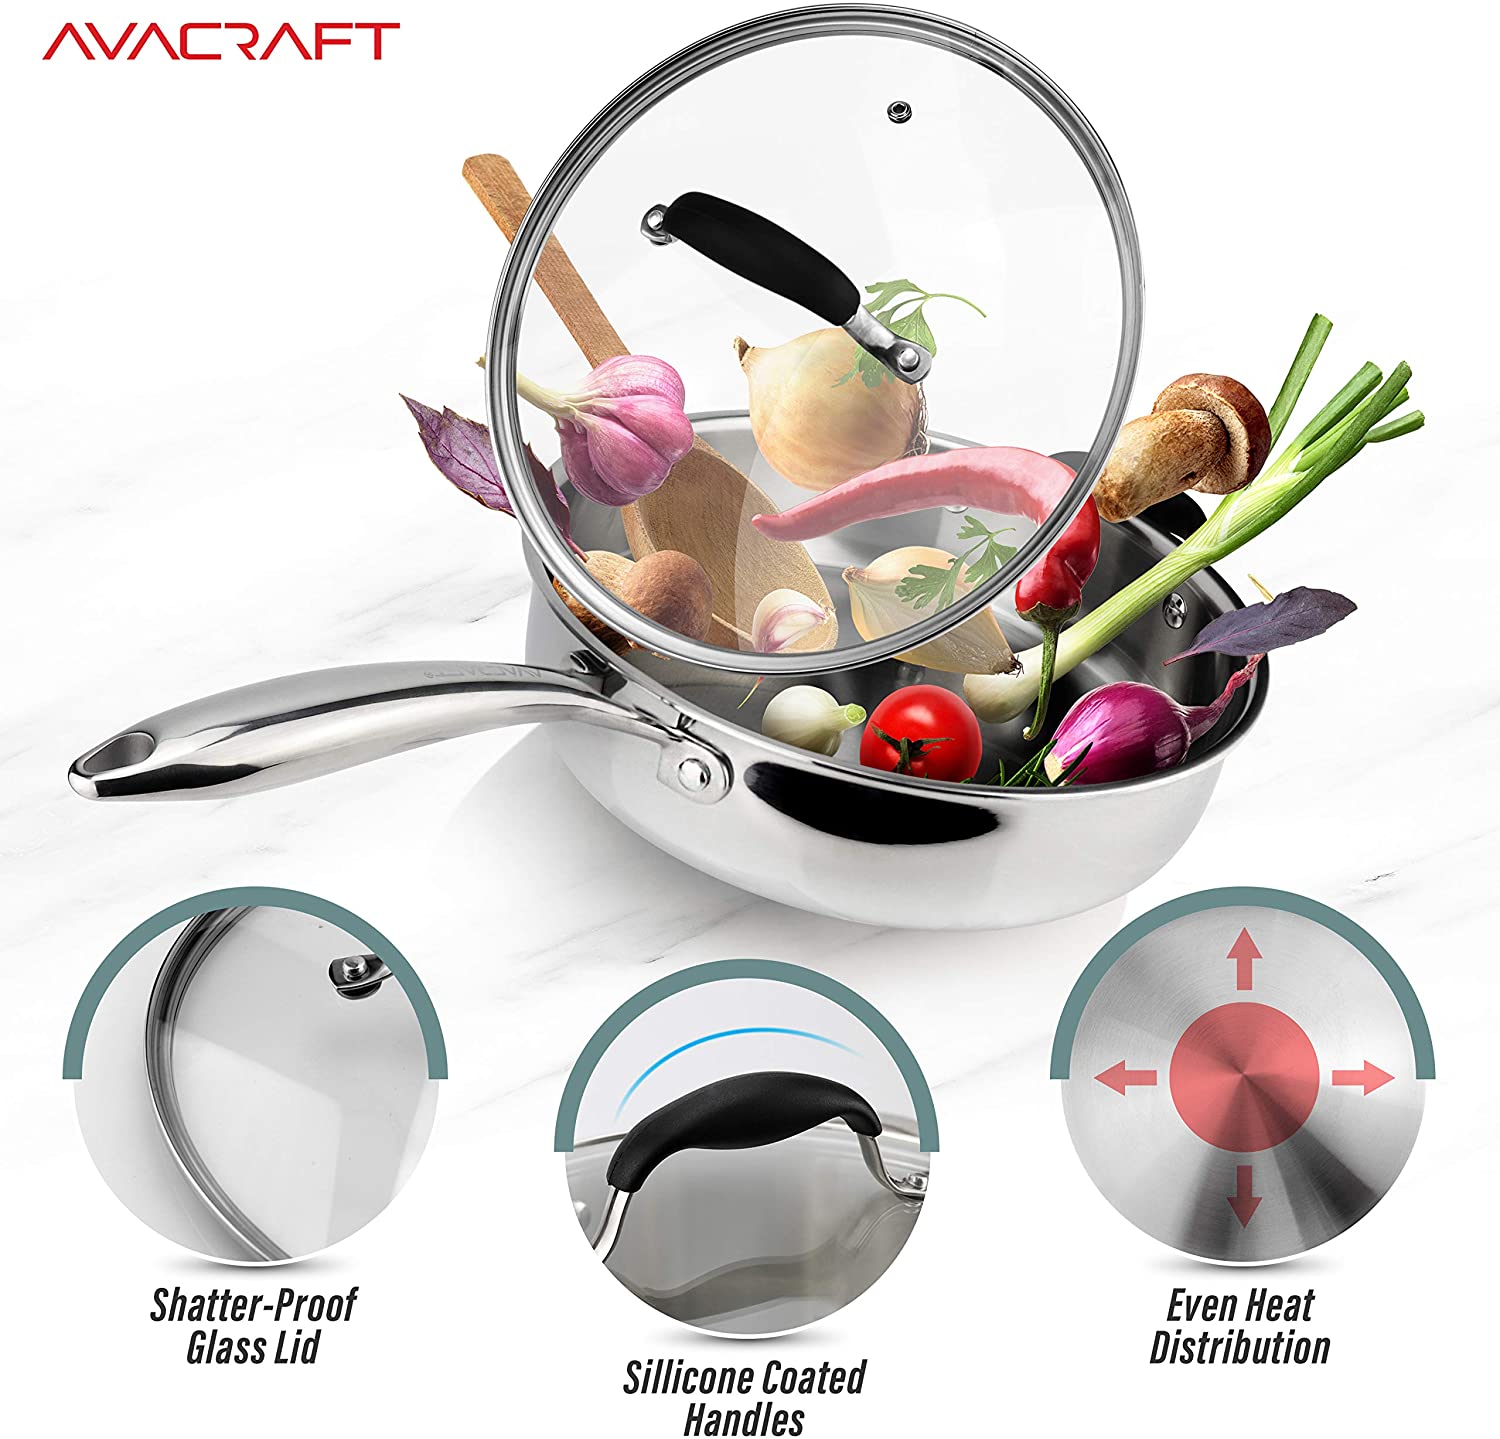 AVACRAFT 18/10 Stainless Steel Everyday Pan, Stir Fry Pan with